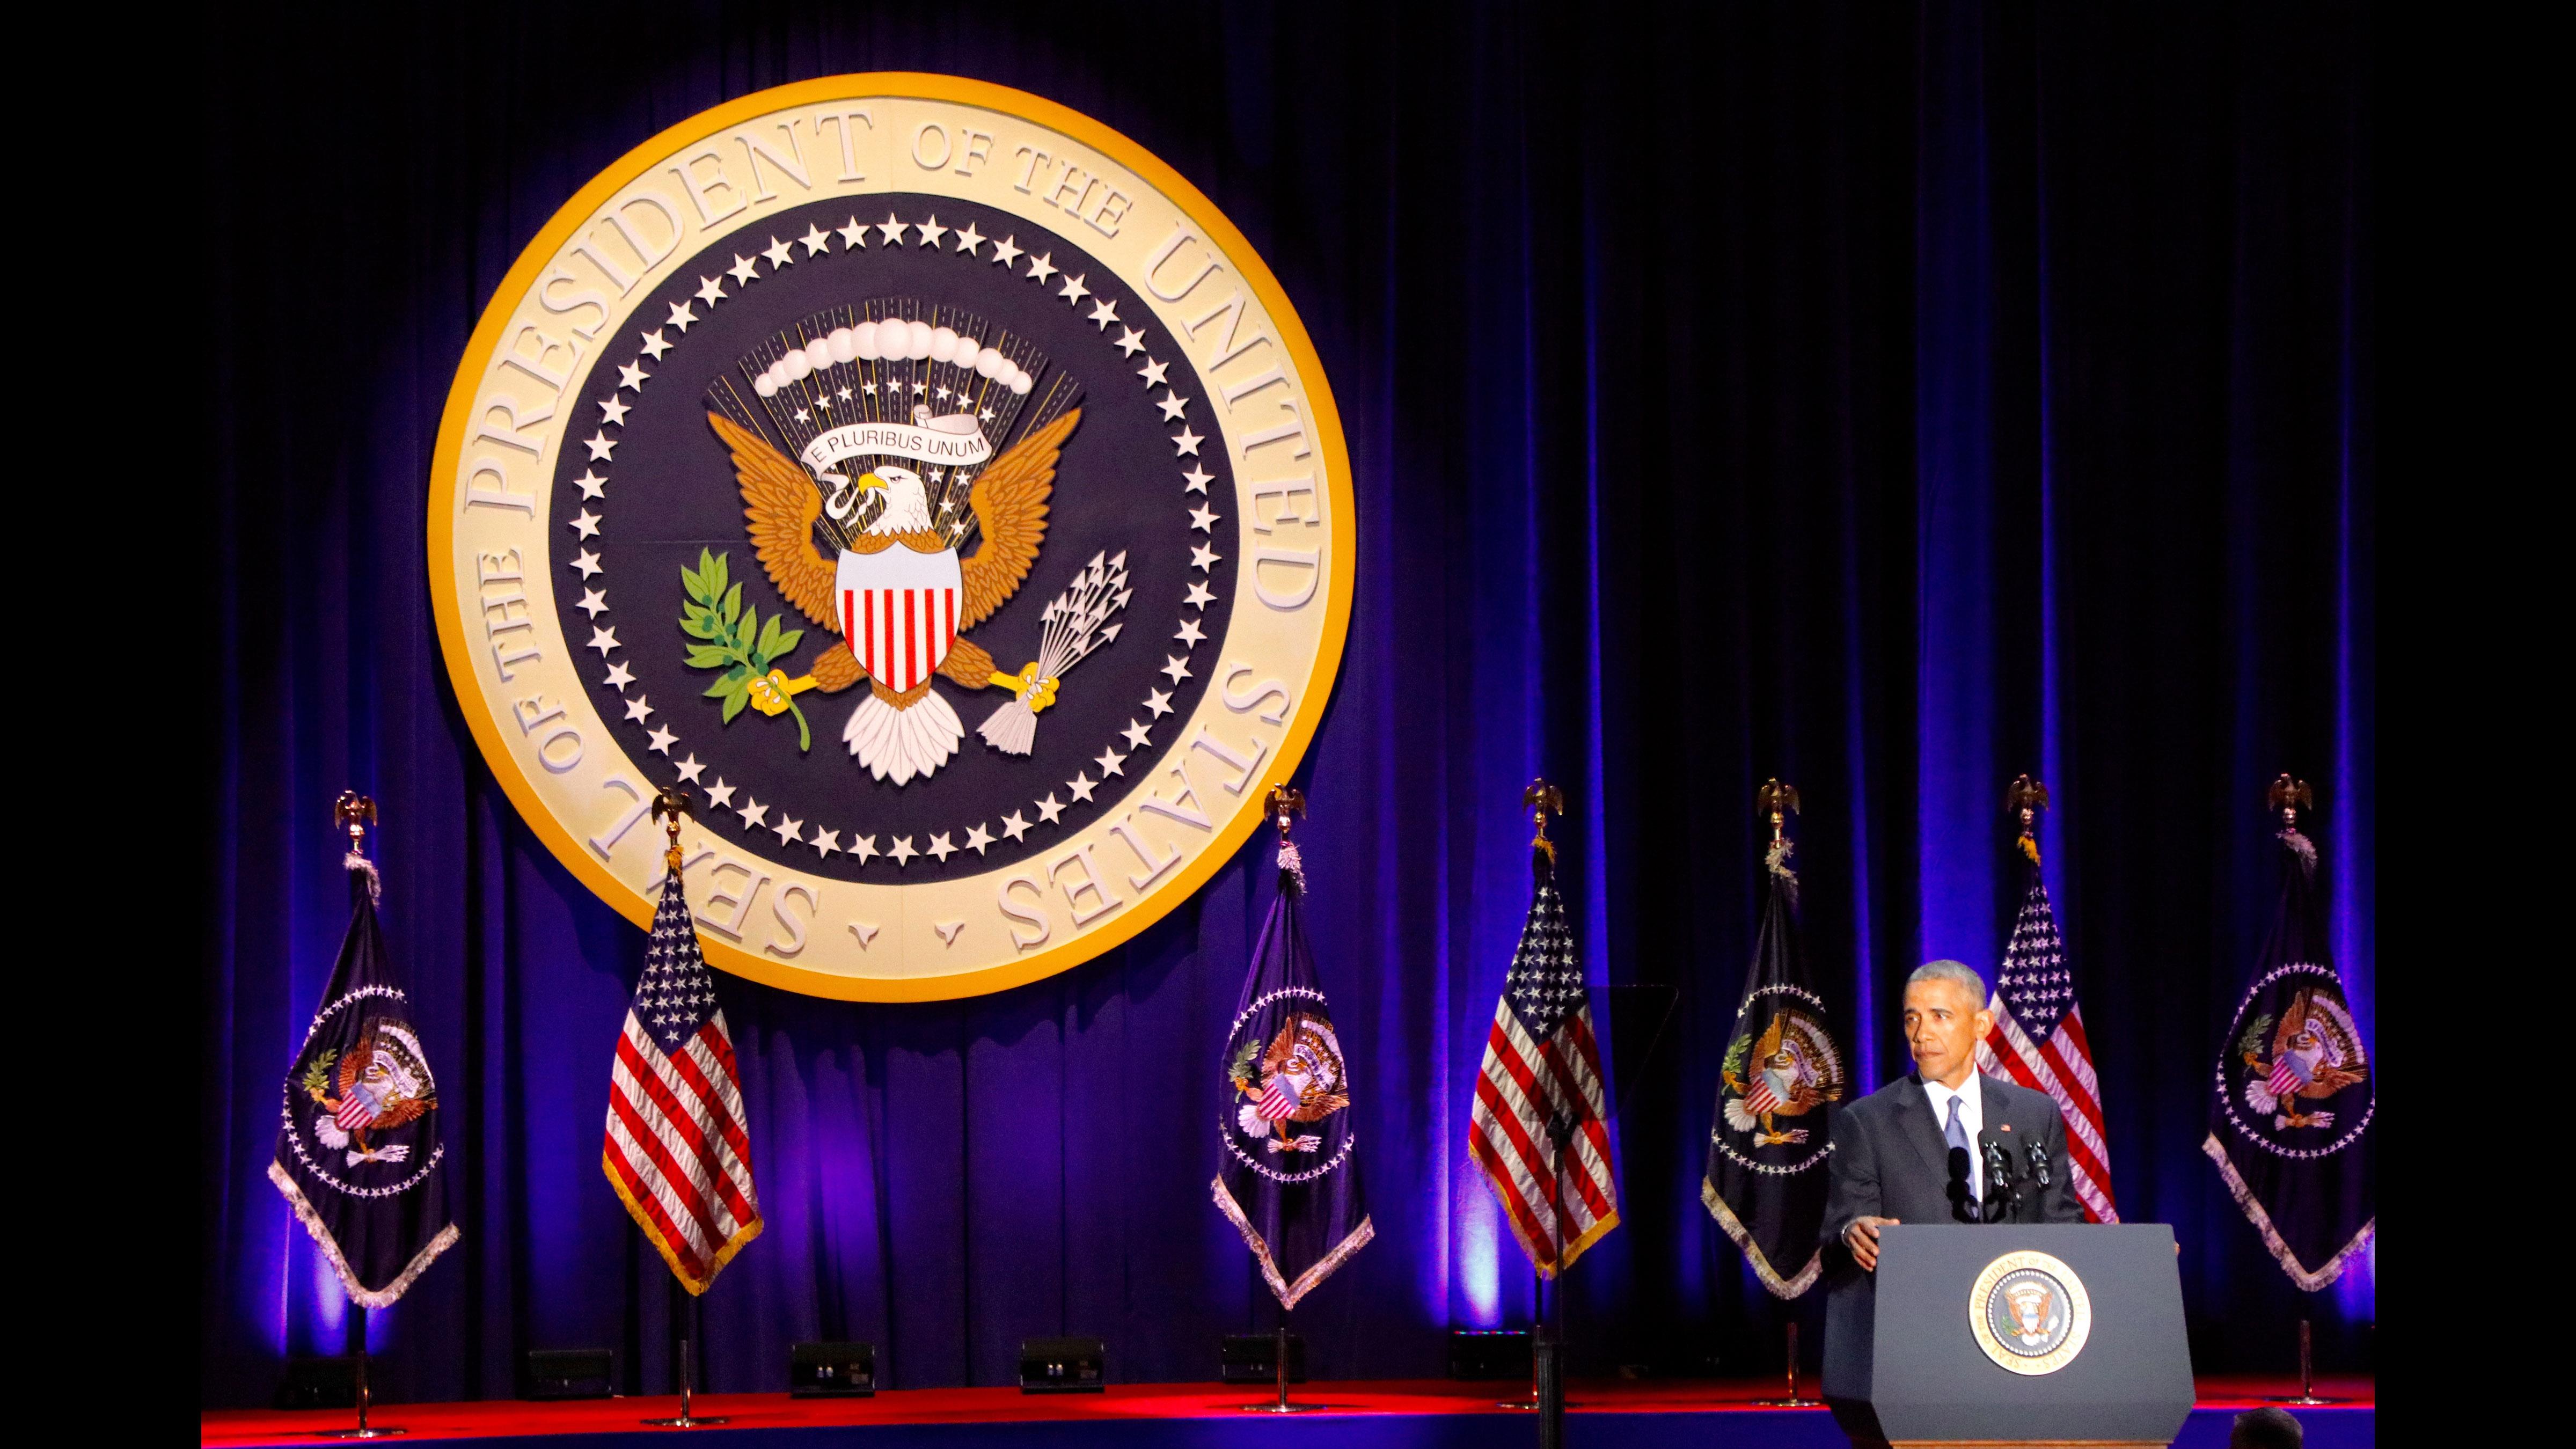 Obama's farewell speech in Chicago is the first speech of its kind to be given by a president in their hometown, according to the White House. (Evan Garcia / Chicago Tonight)